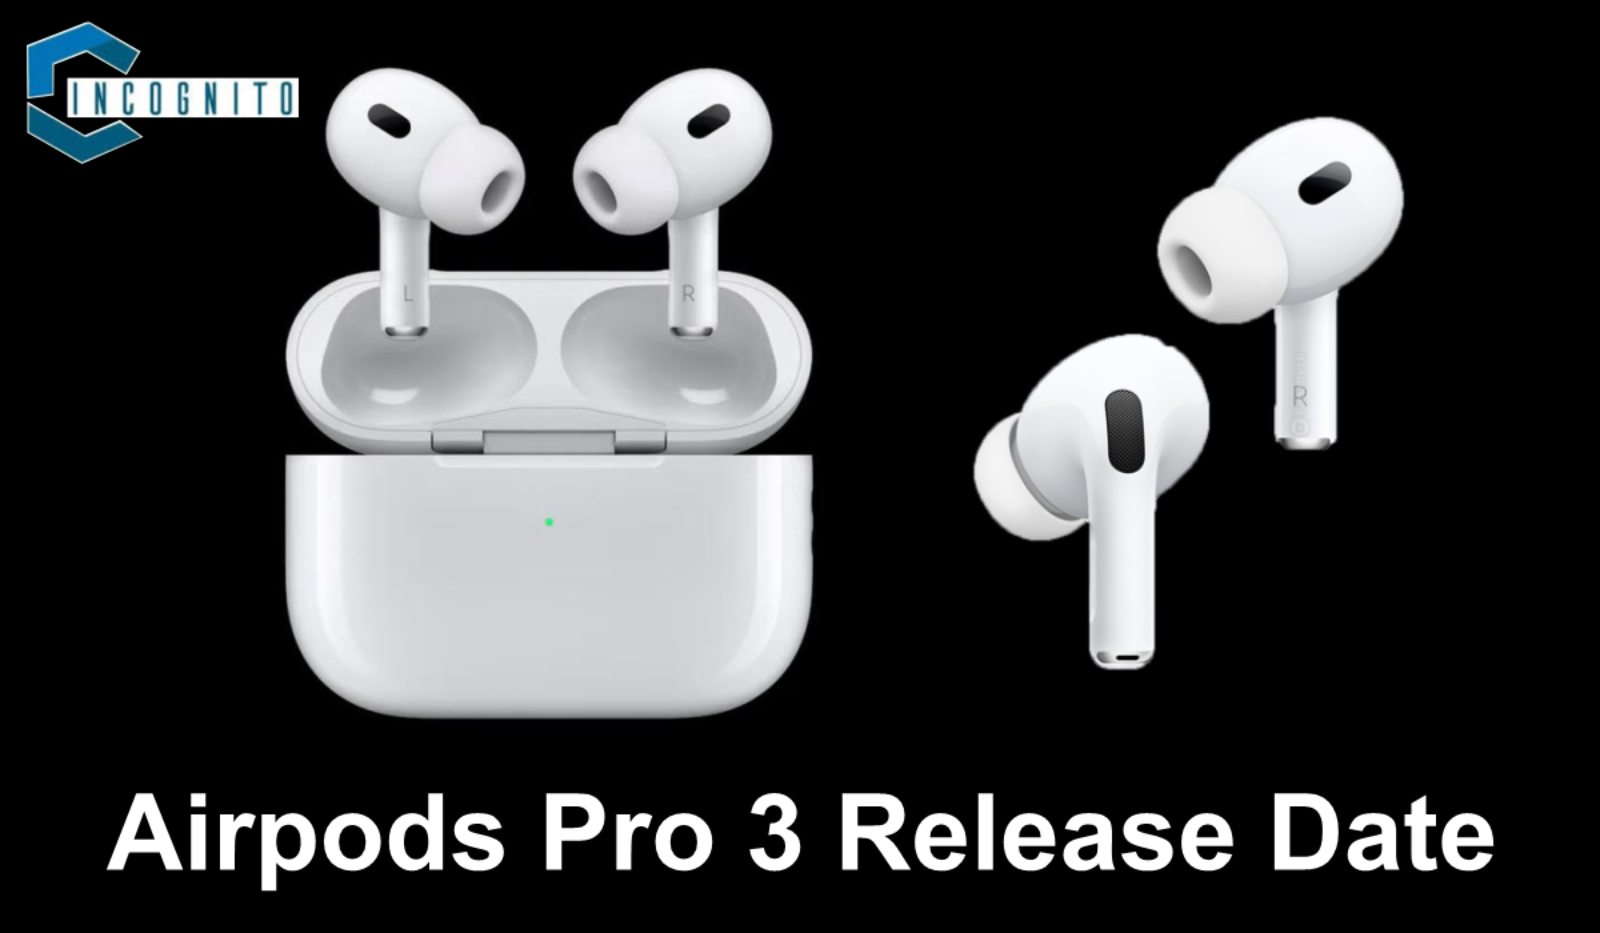 Airpods Pro 3 Release Date: When will it arrive?